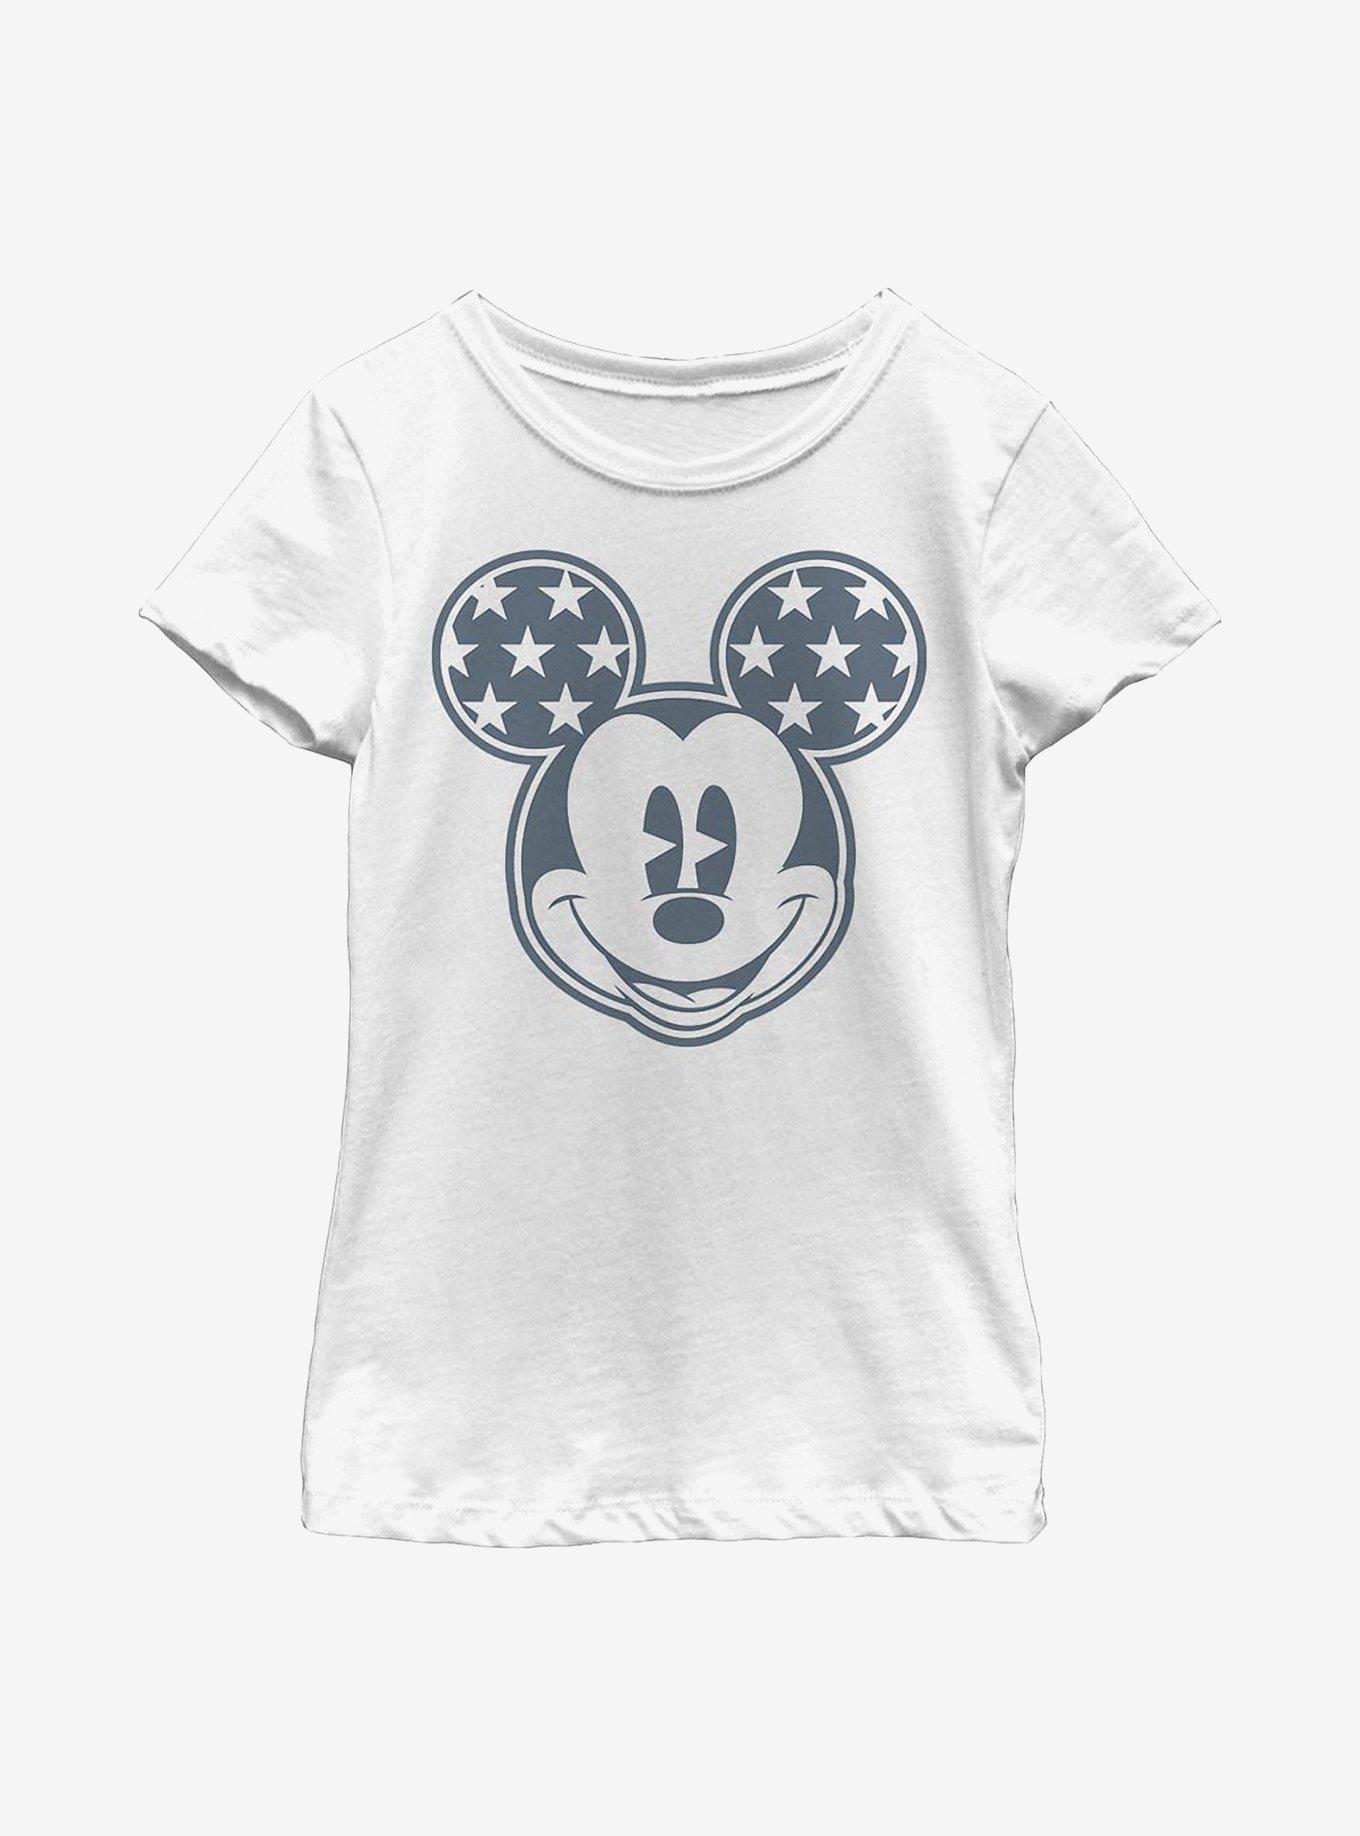 Disney Mickey Mouse Star Ears Youth Girls T-Shirt, WHITE, hi-res